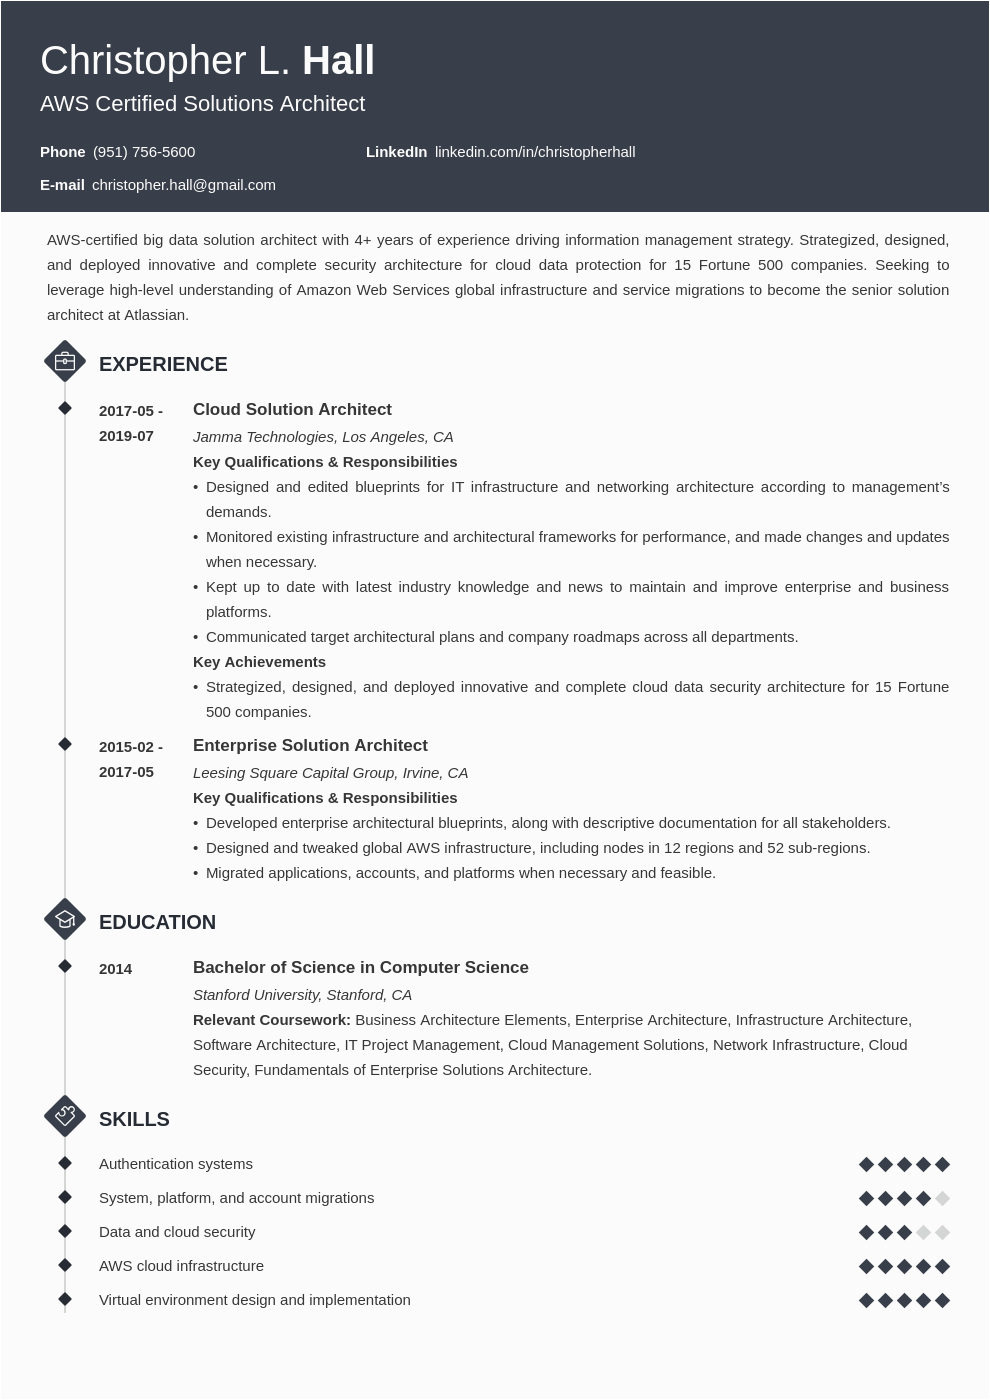 Aws Sample Resumes for 3 Years Experience Aws Sample Resume for 3 Years Experience Best Resume